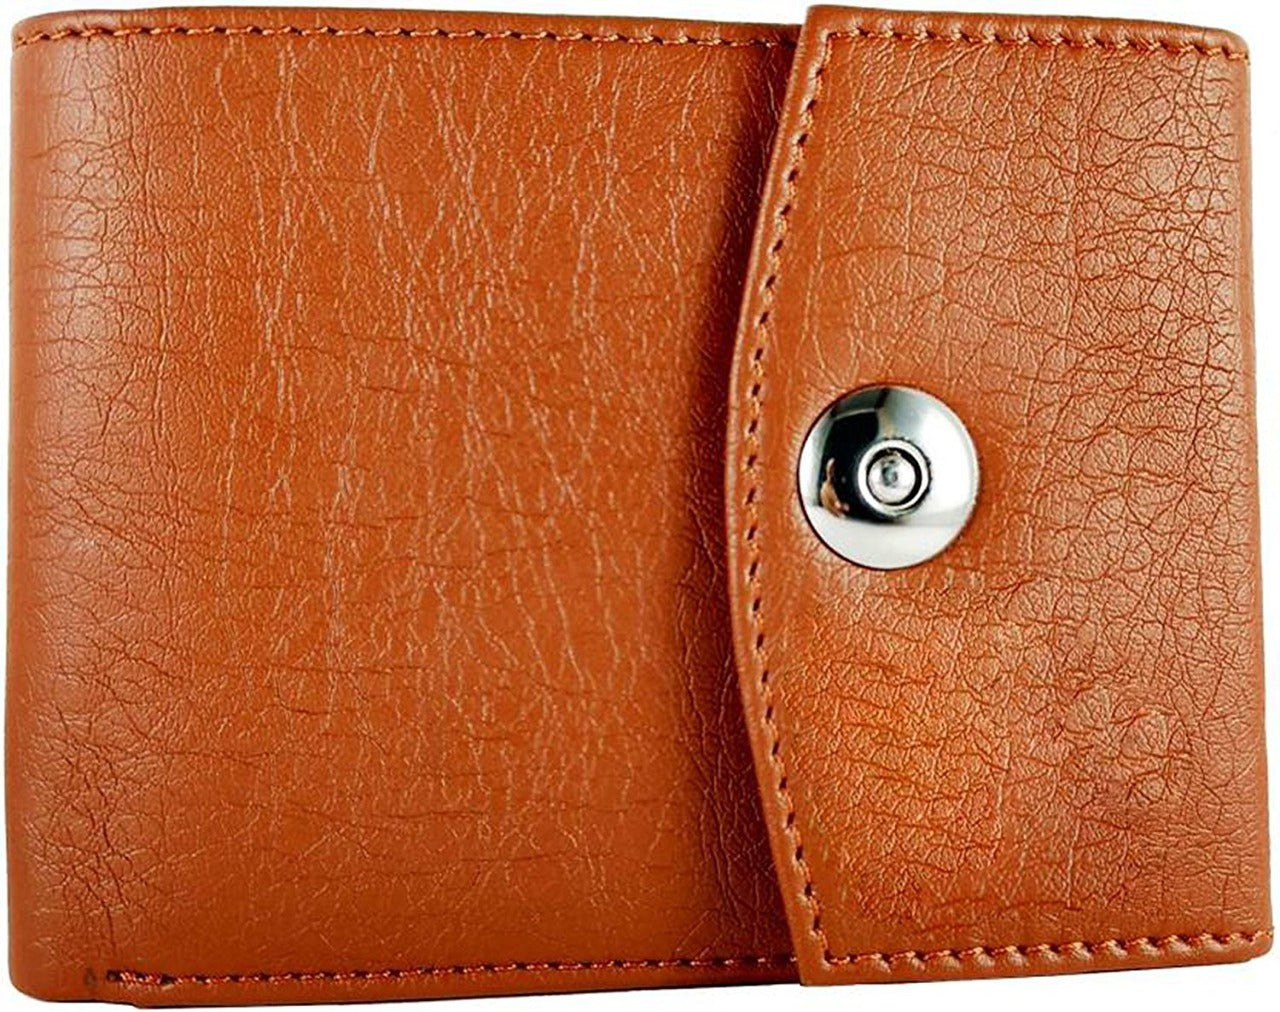 Luxurious & High Quality of Artificial Leather Wallet for Male